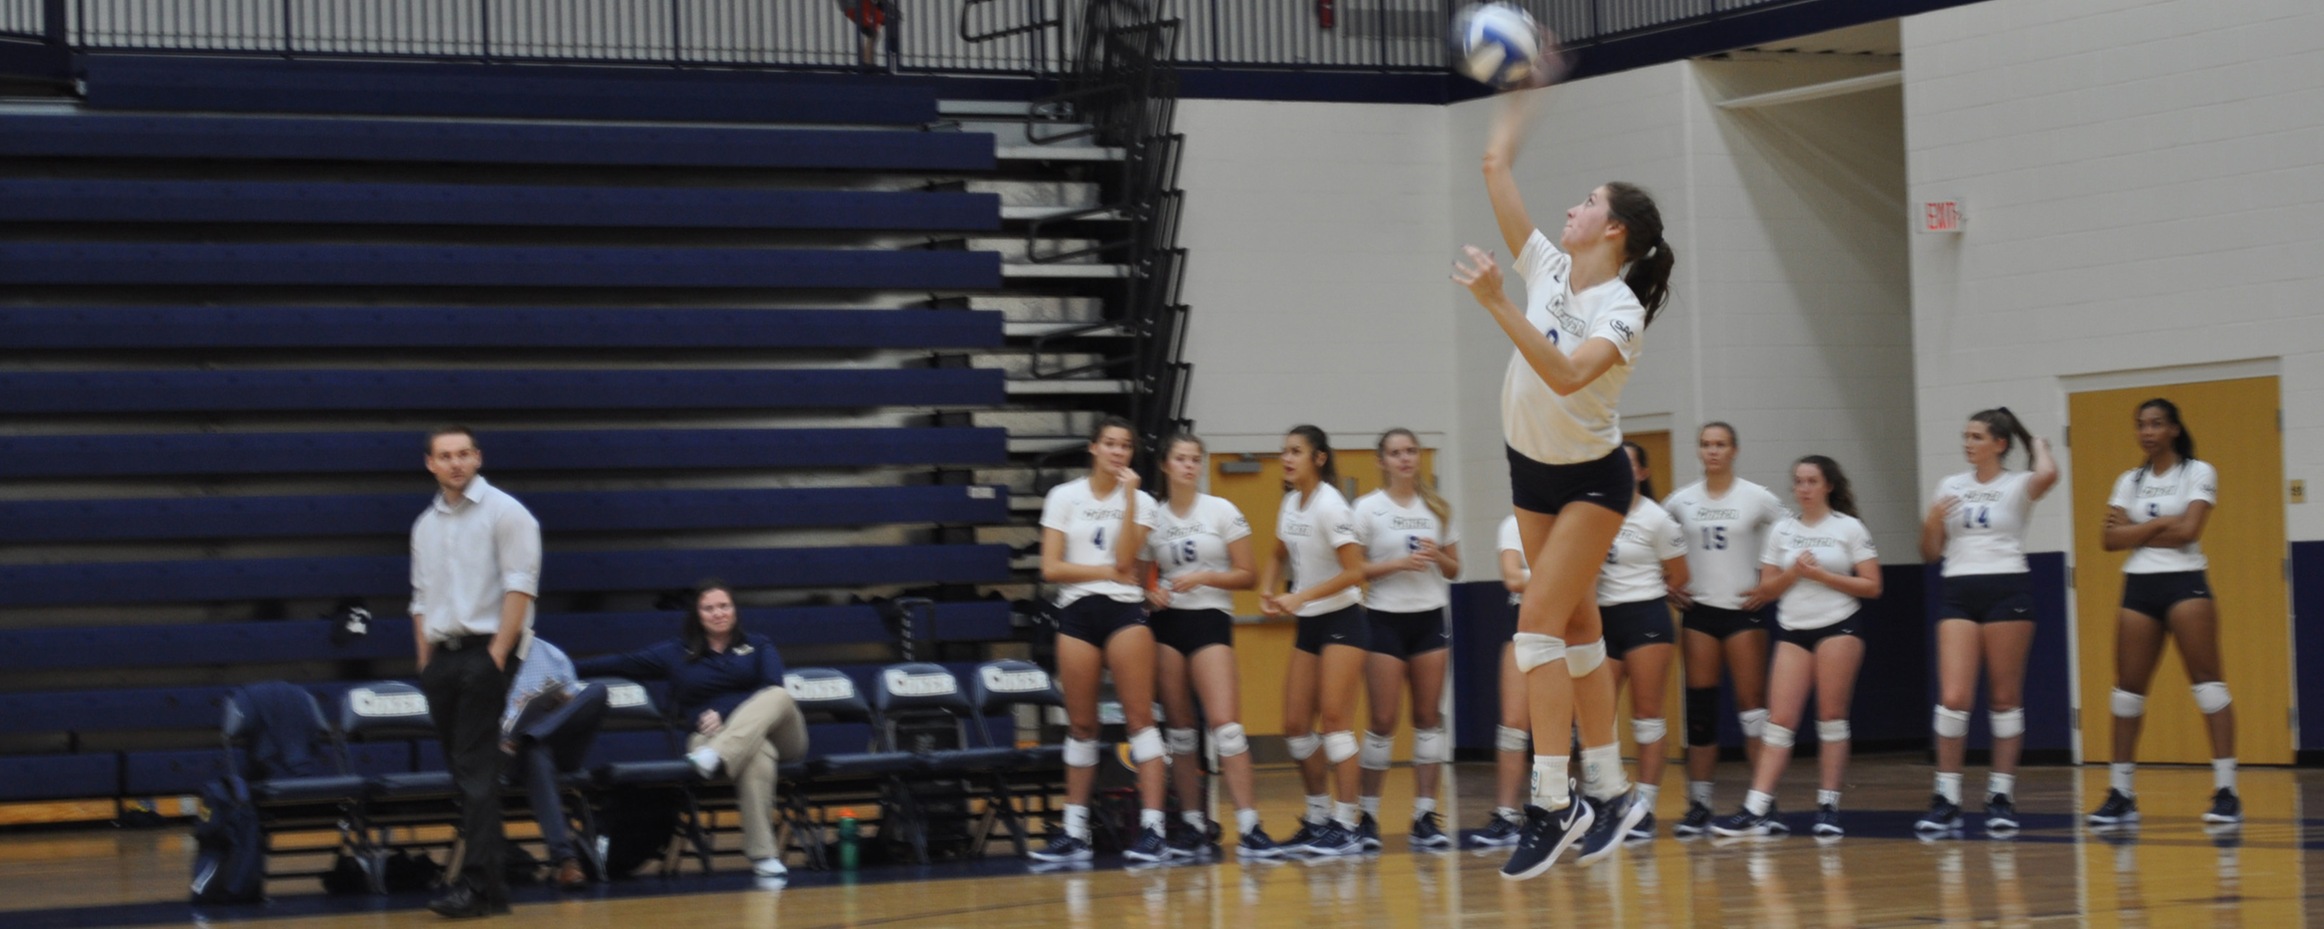 Cobras Fall Against Mars Hill in Conference Action on Saturday